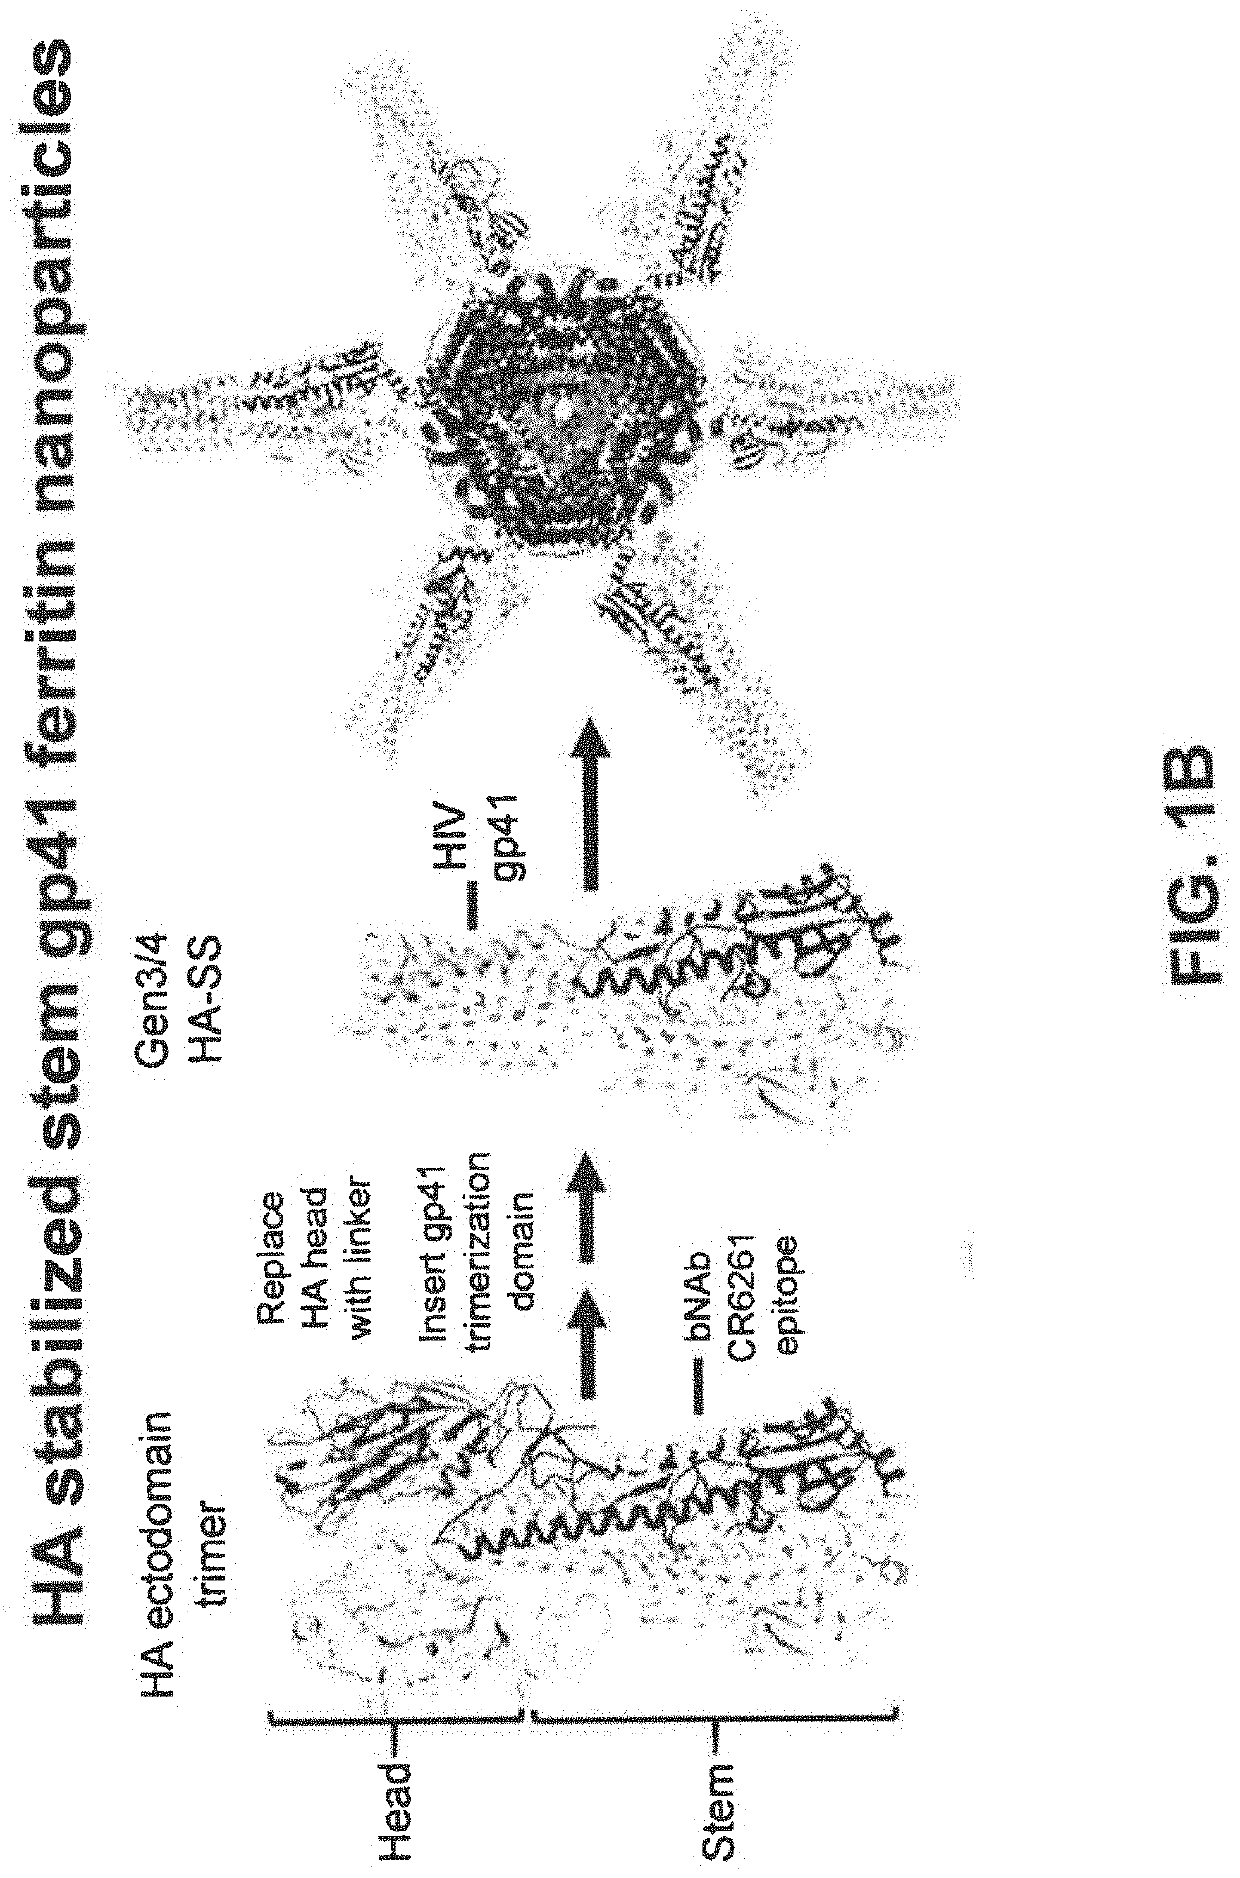 Stabilized group 2 influenza hemagglutinin stem region trimers and uses thereof